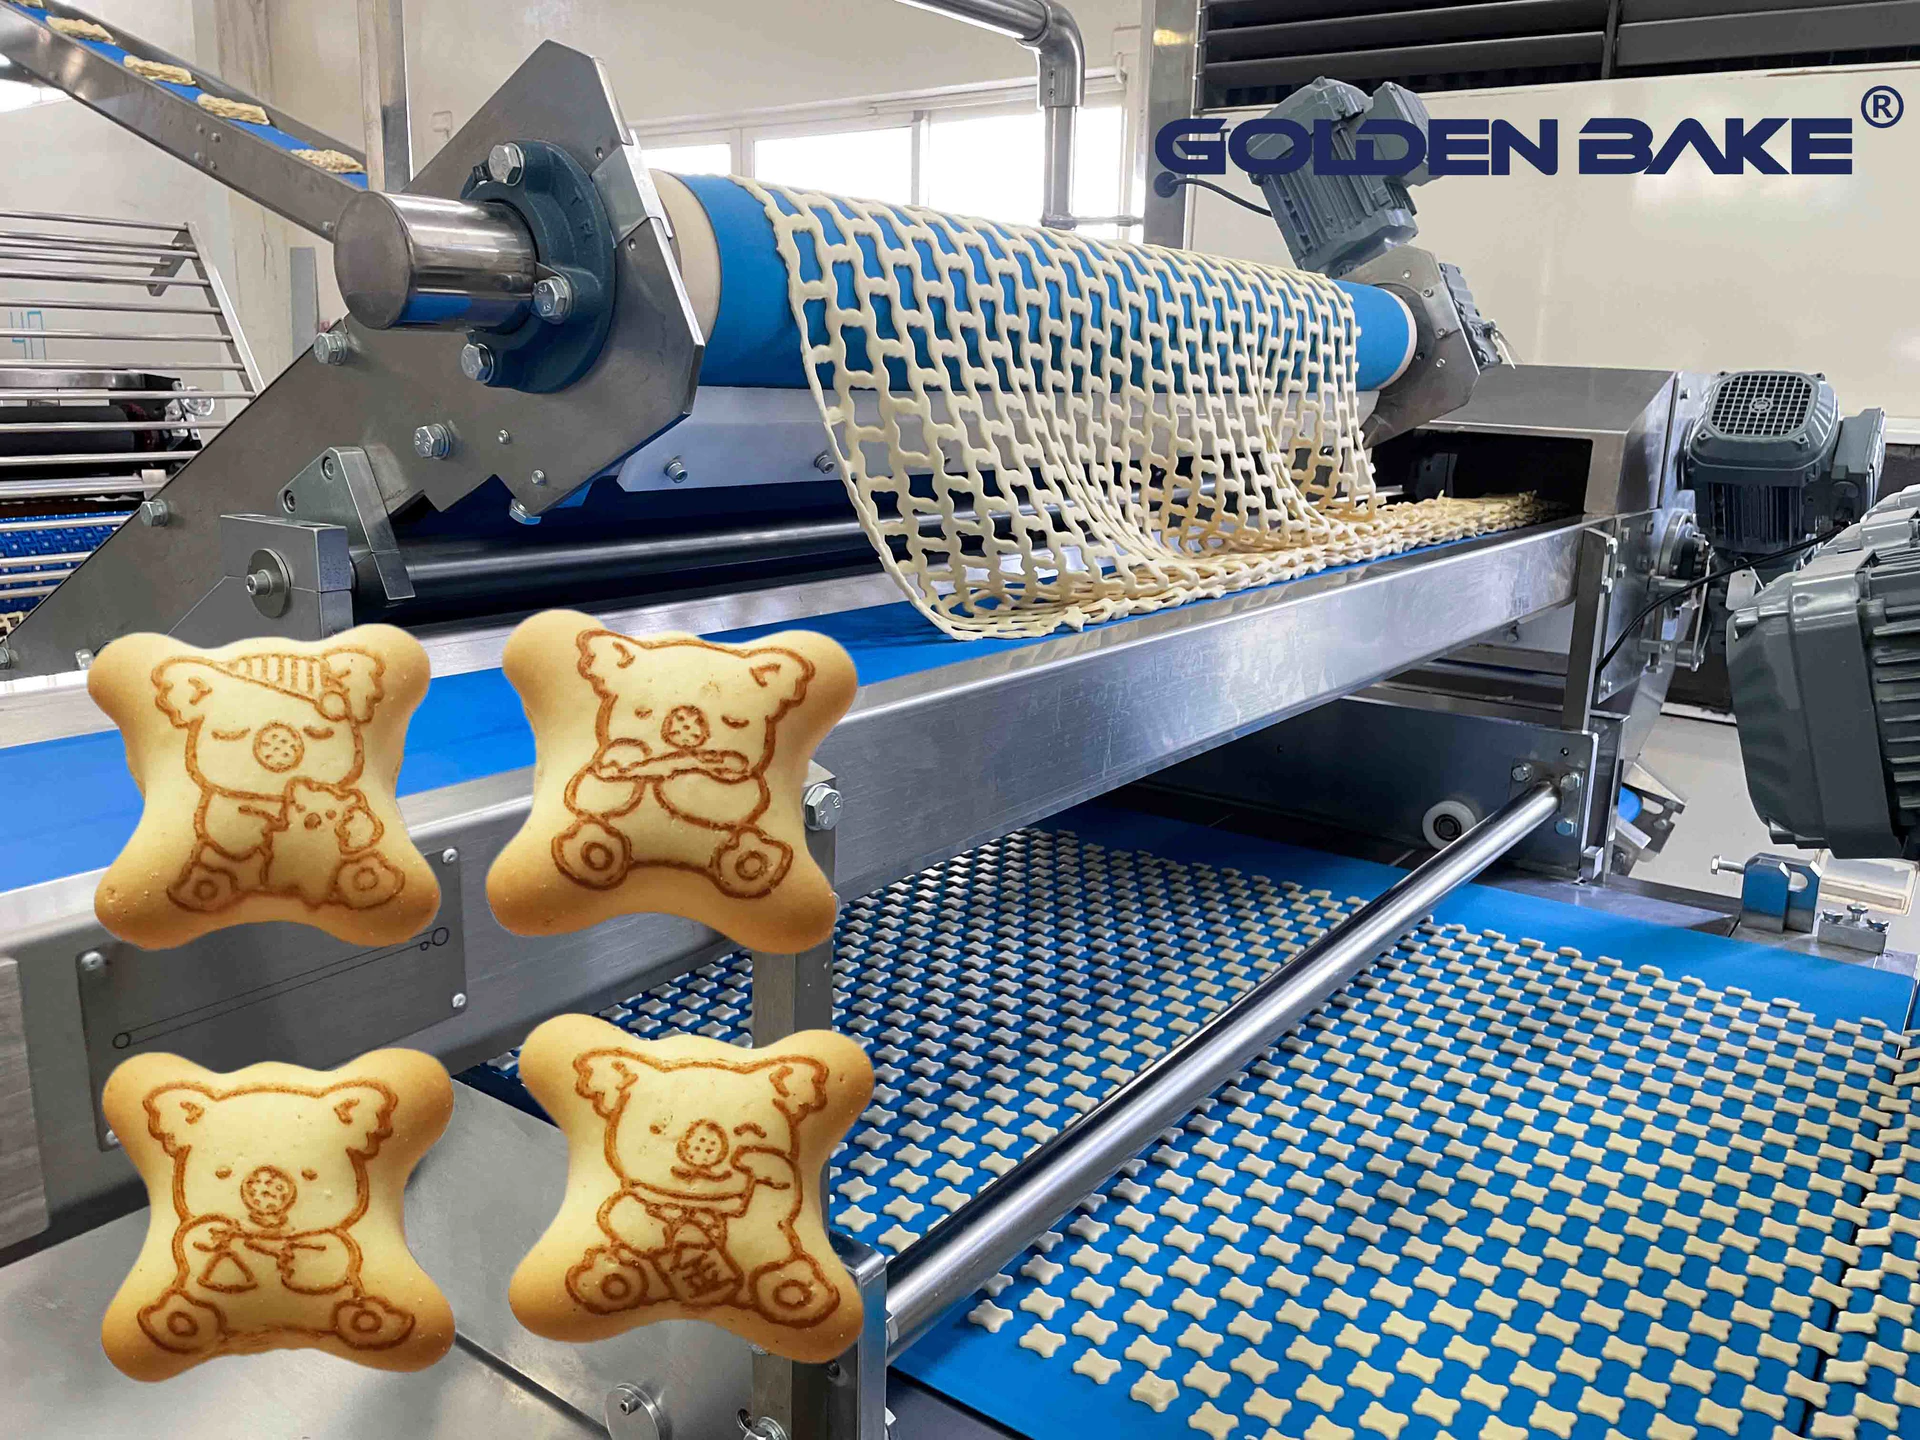 Center Filled Biscuit Production Line For Hello Panda Biscuit - Golden Bake